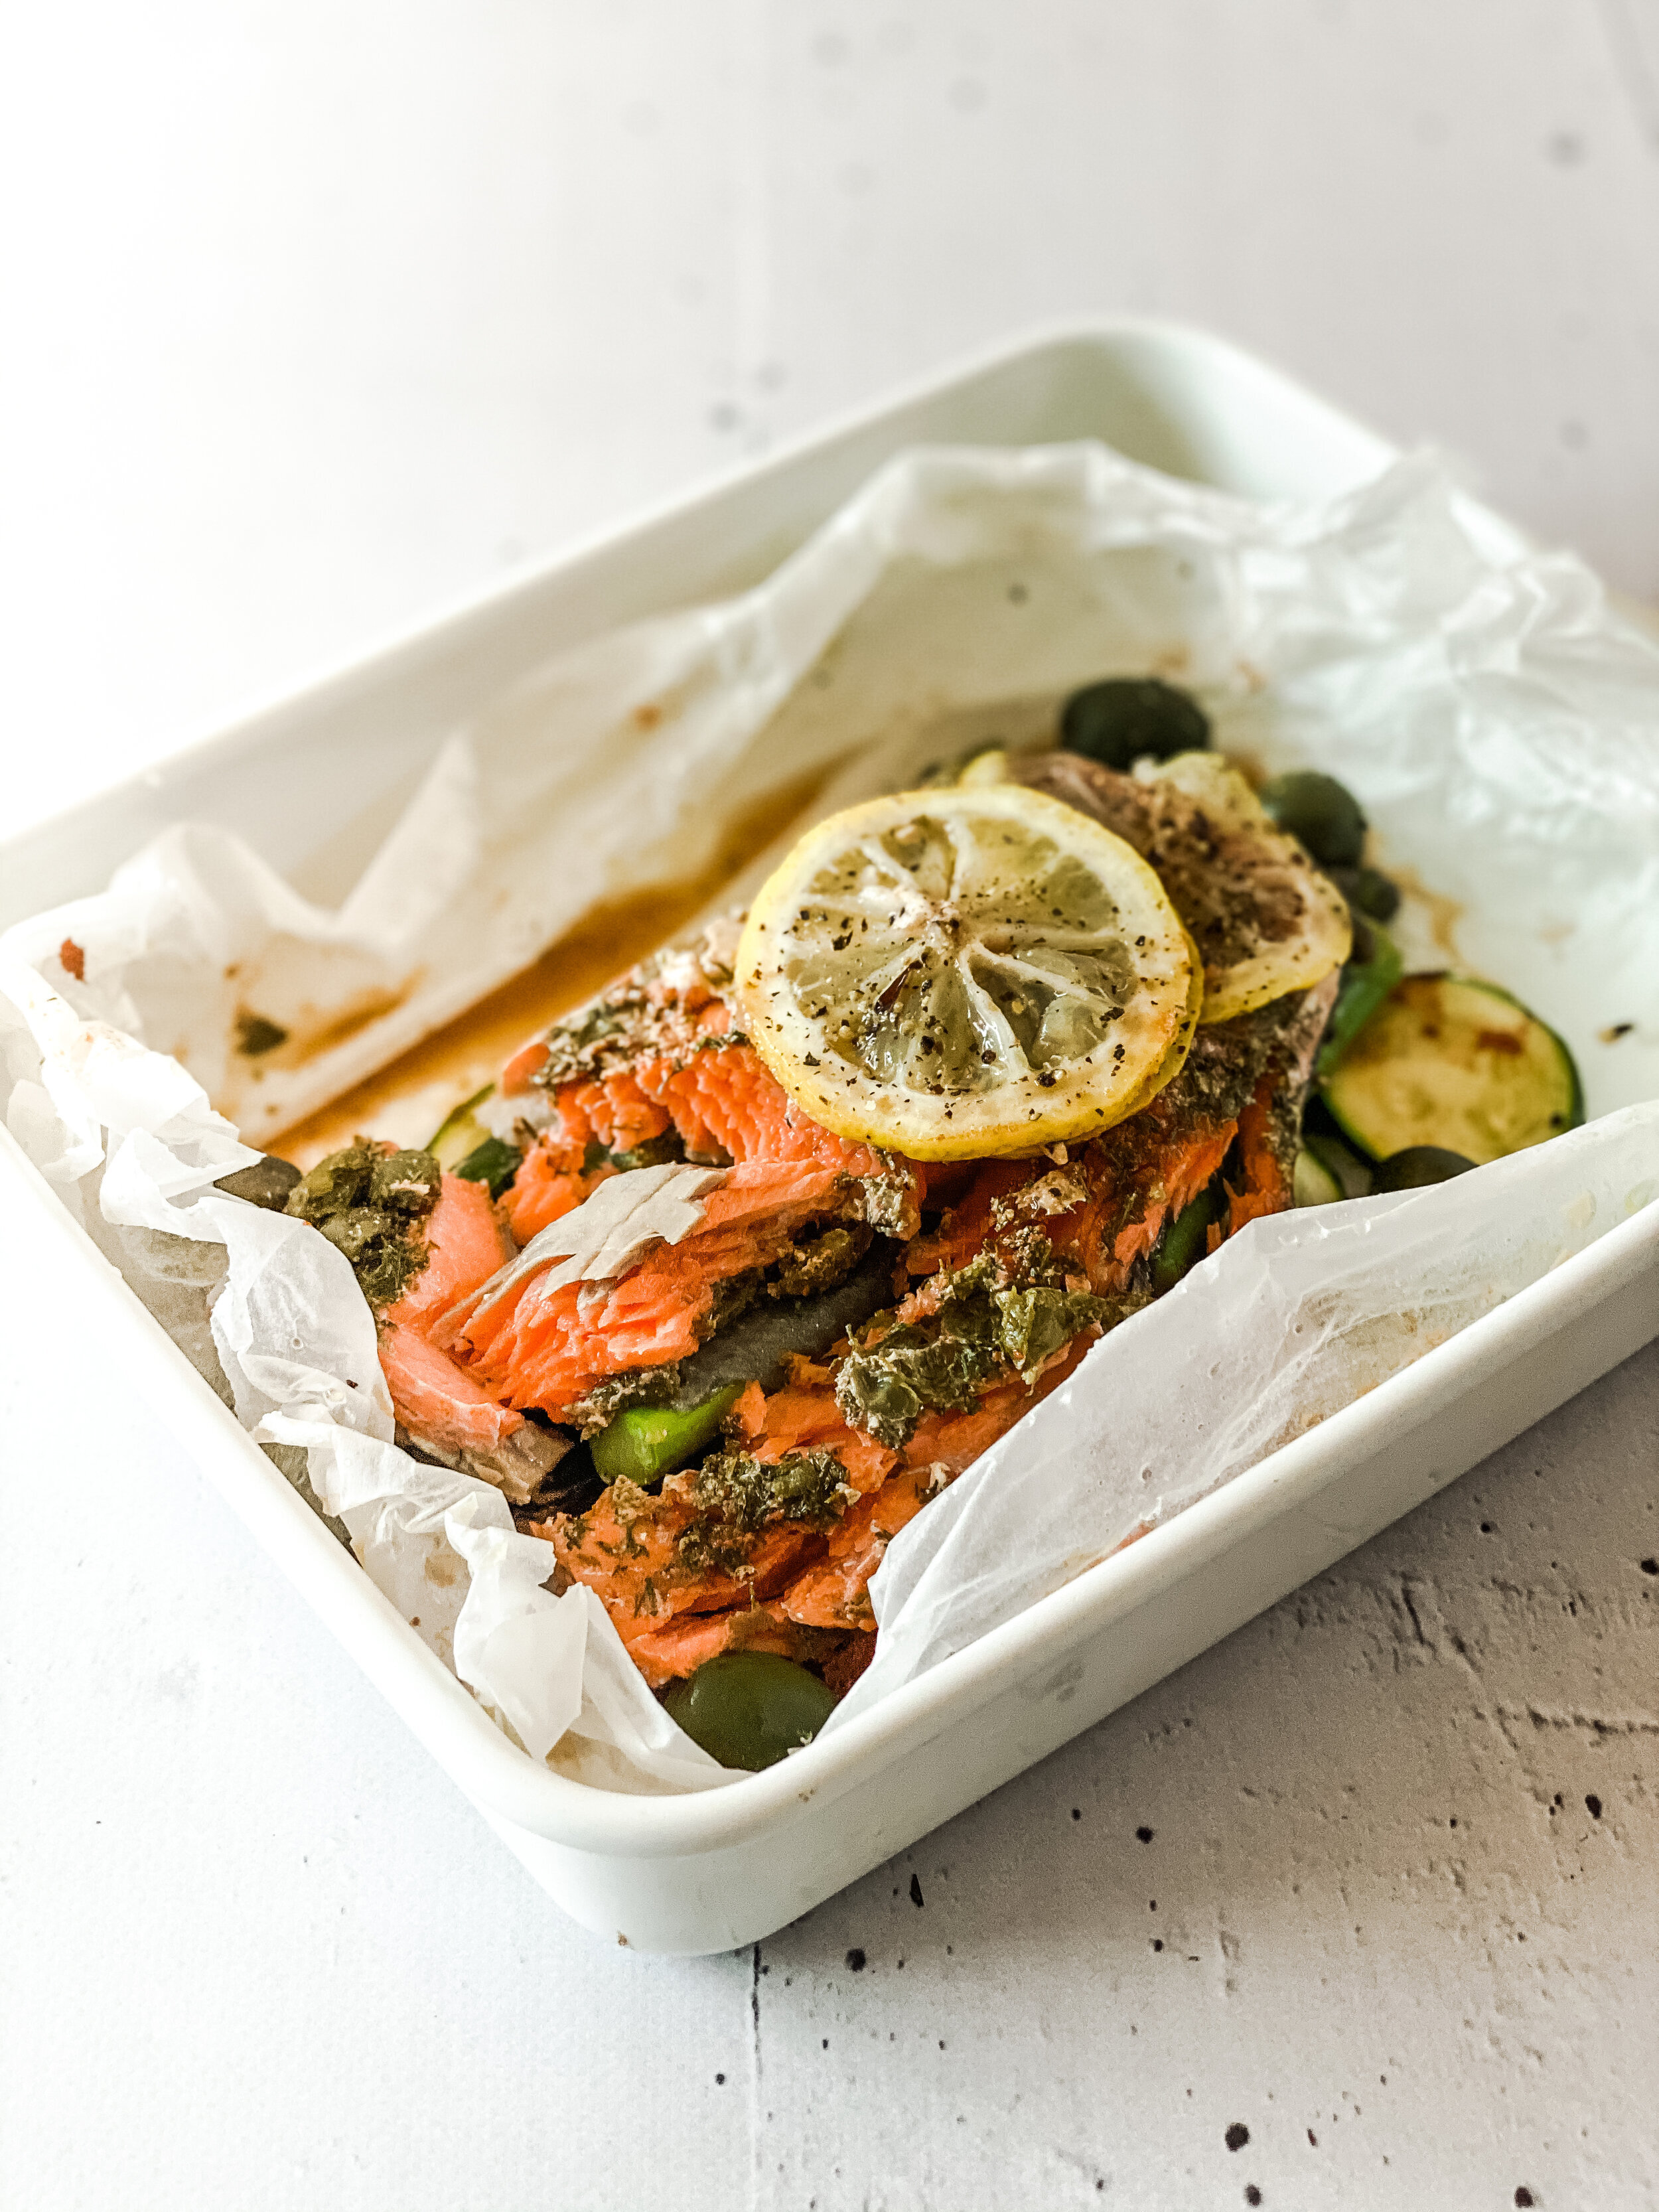 Wild Salmon En Papillote With Greens + Olives by Liv Kaplan